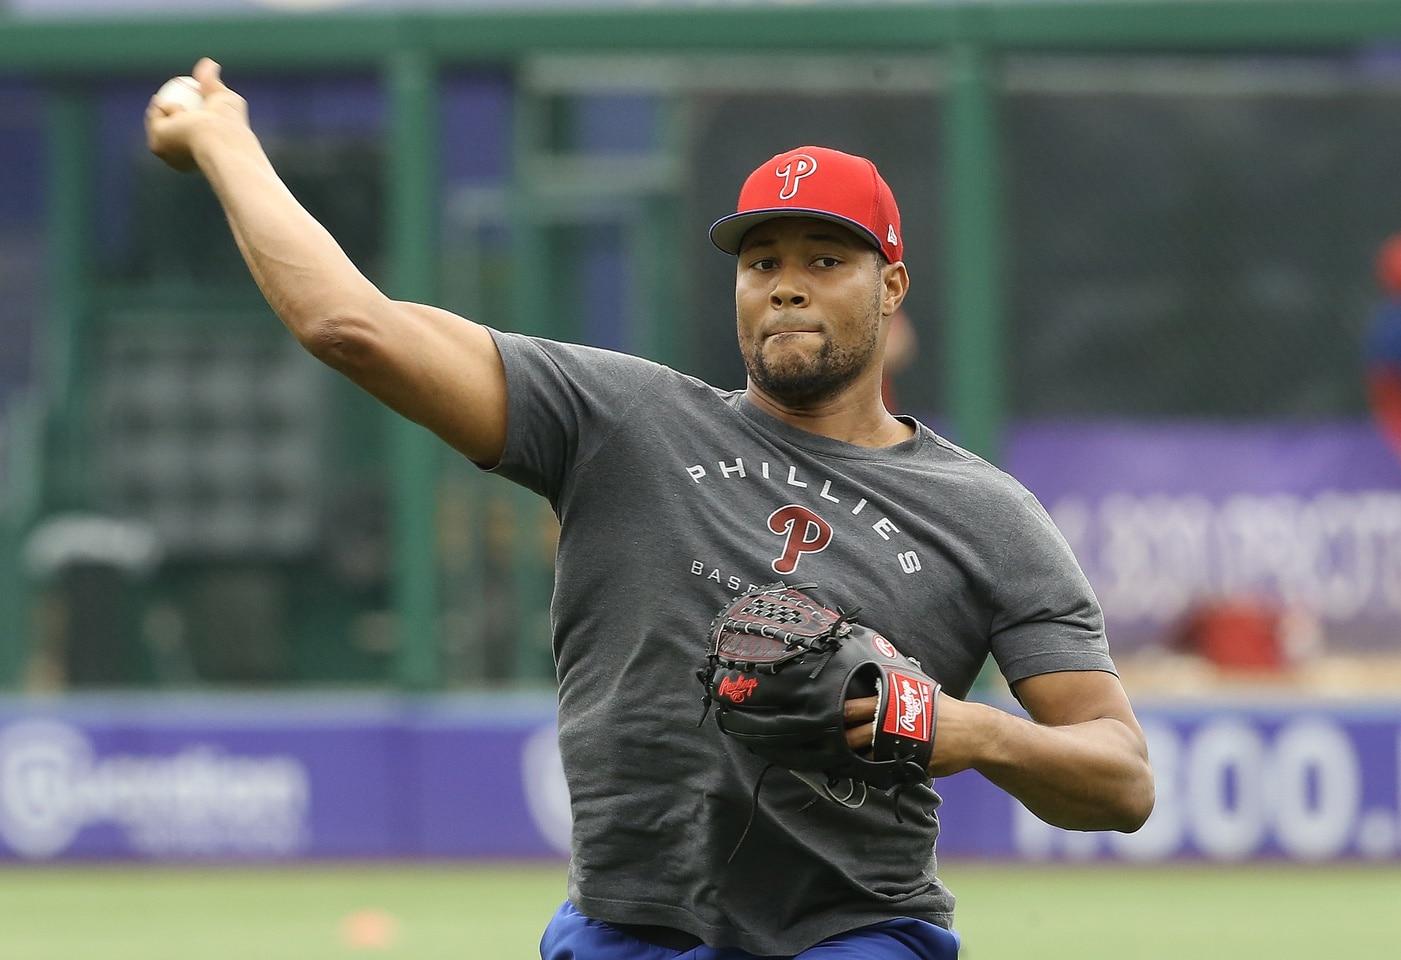 Bubby Rossman and Jeurys Familia Eligible for Phillies NL Championship Rings